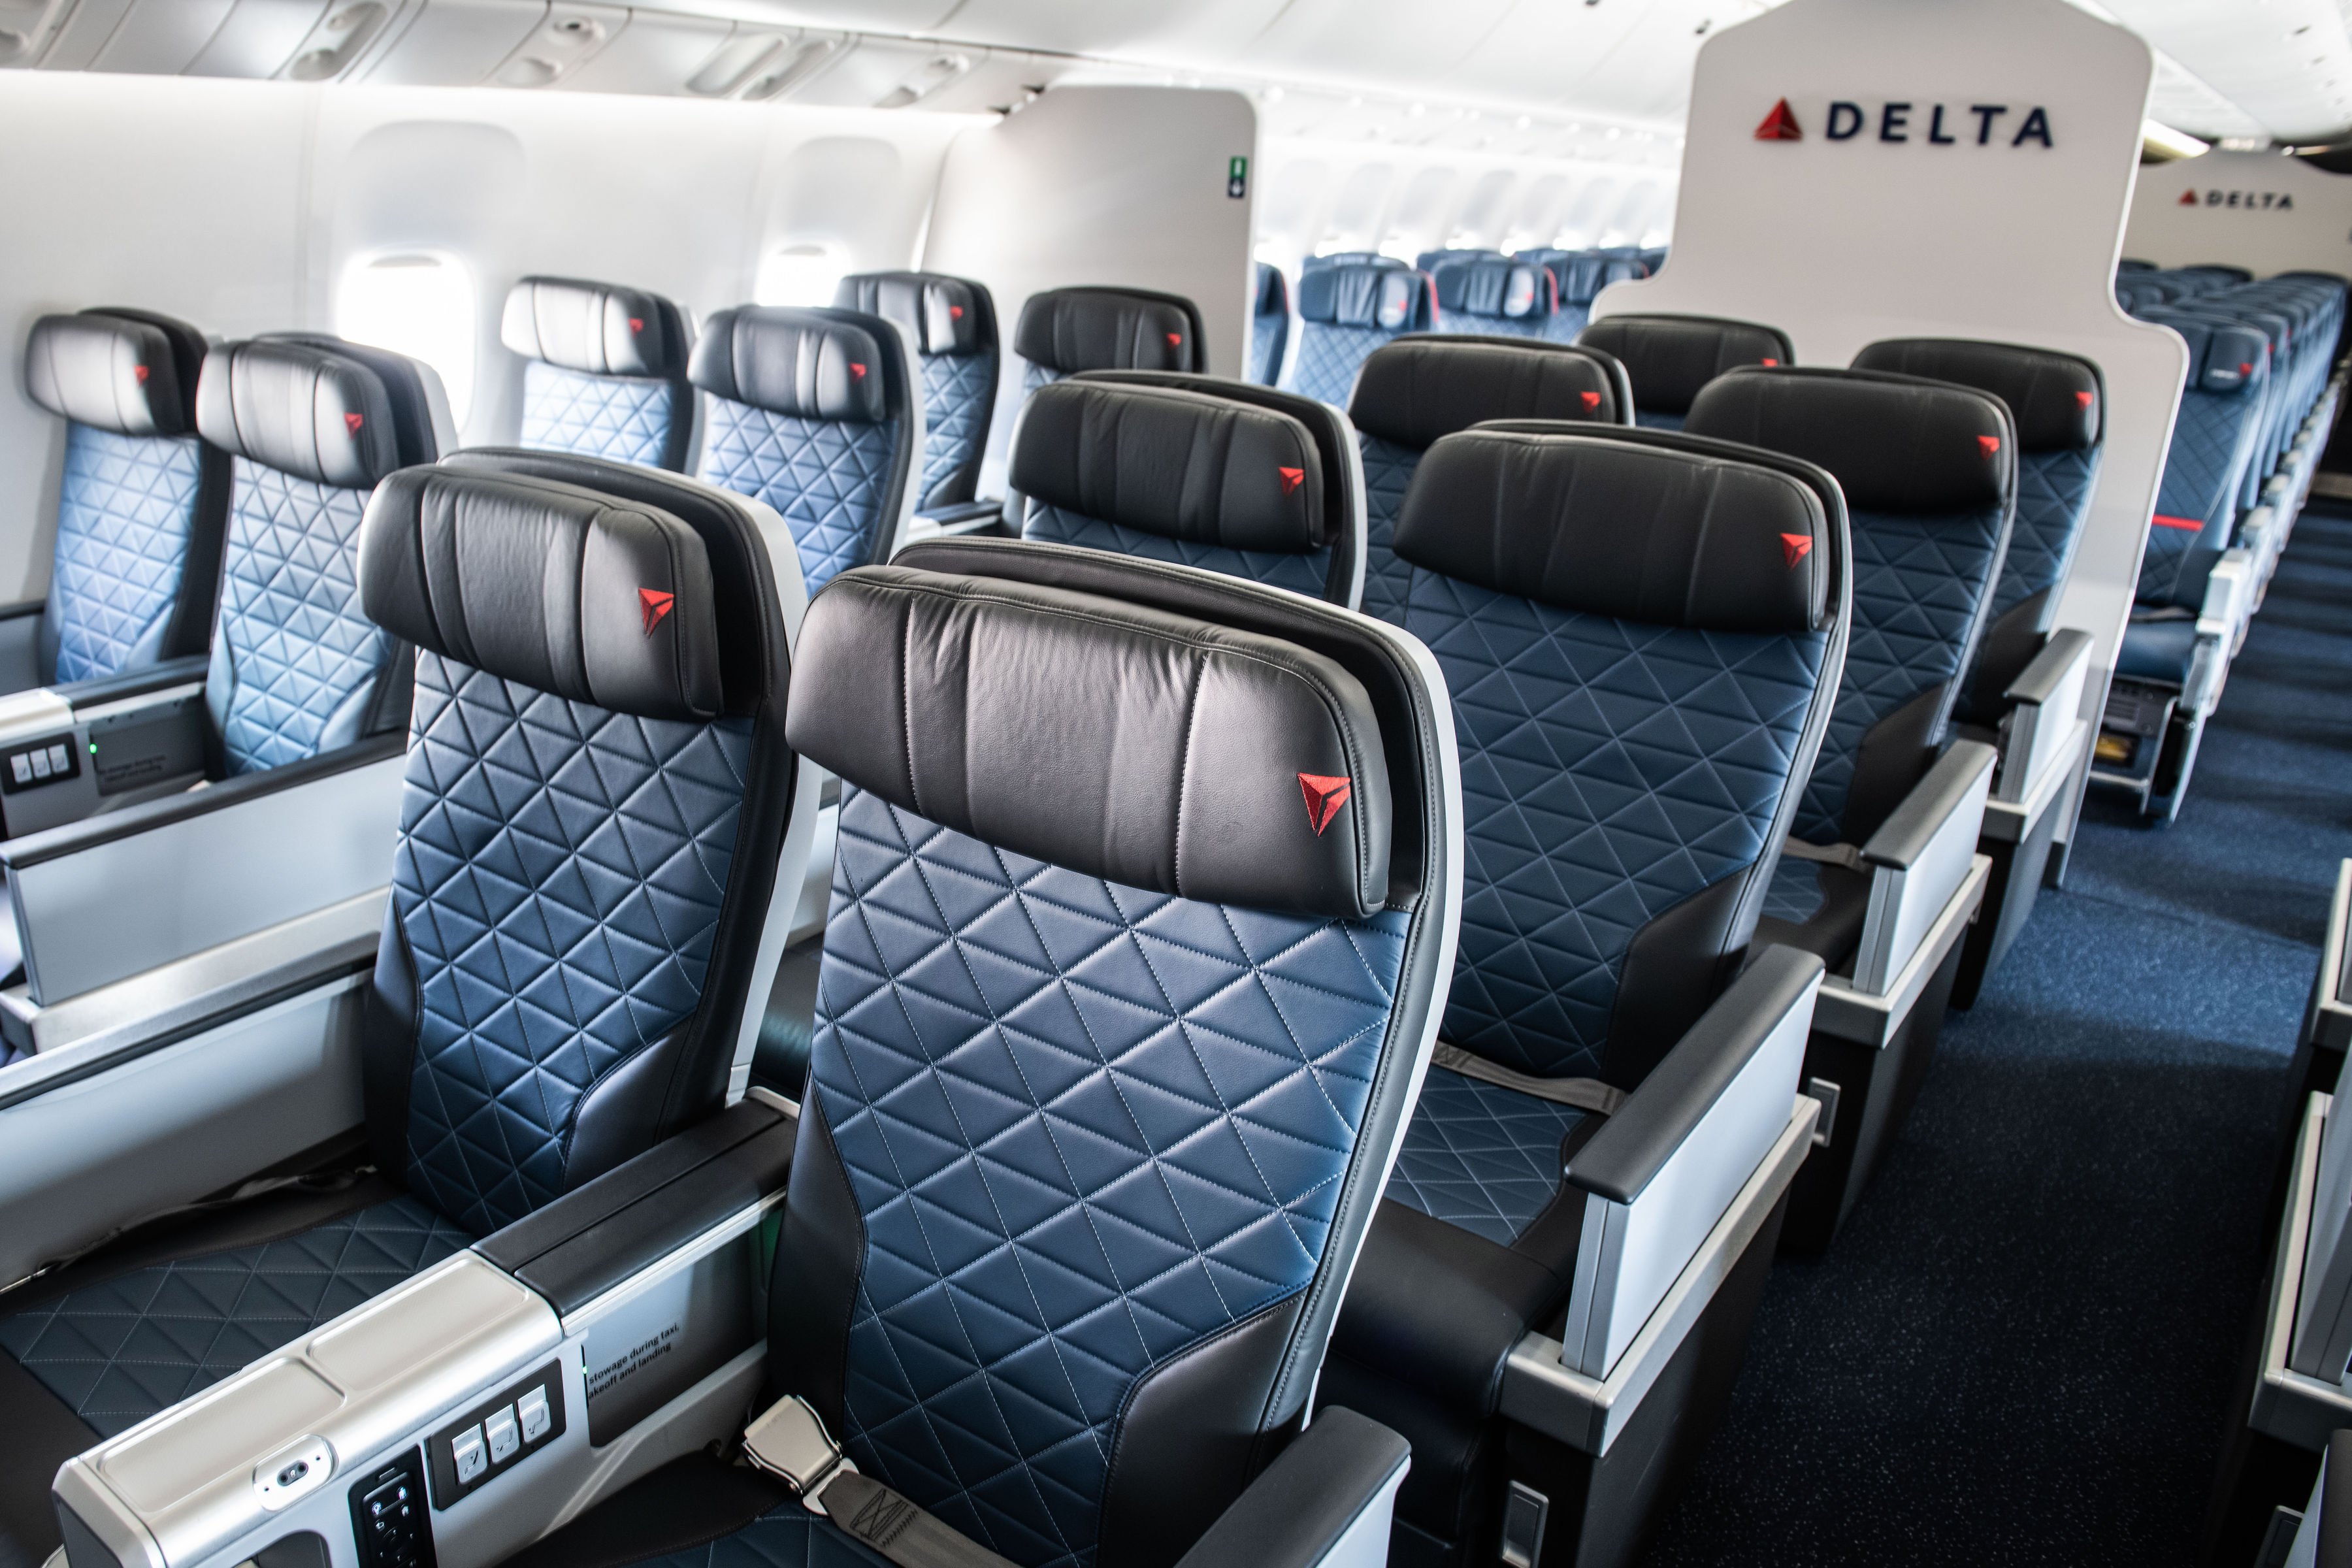 Delta Air Lines Reorganizes Its International Airline Ownership